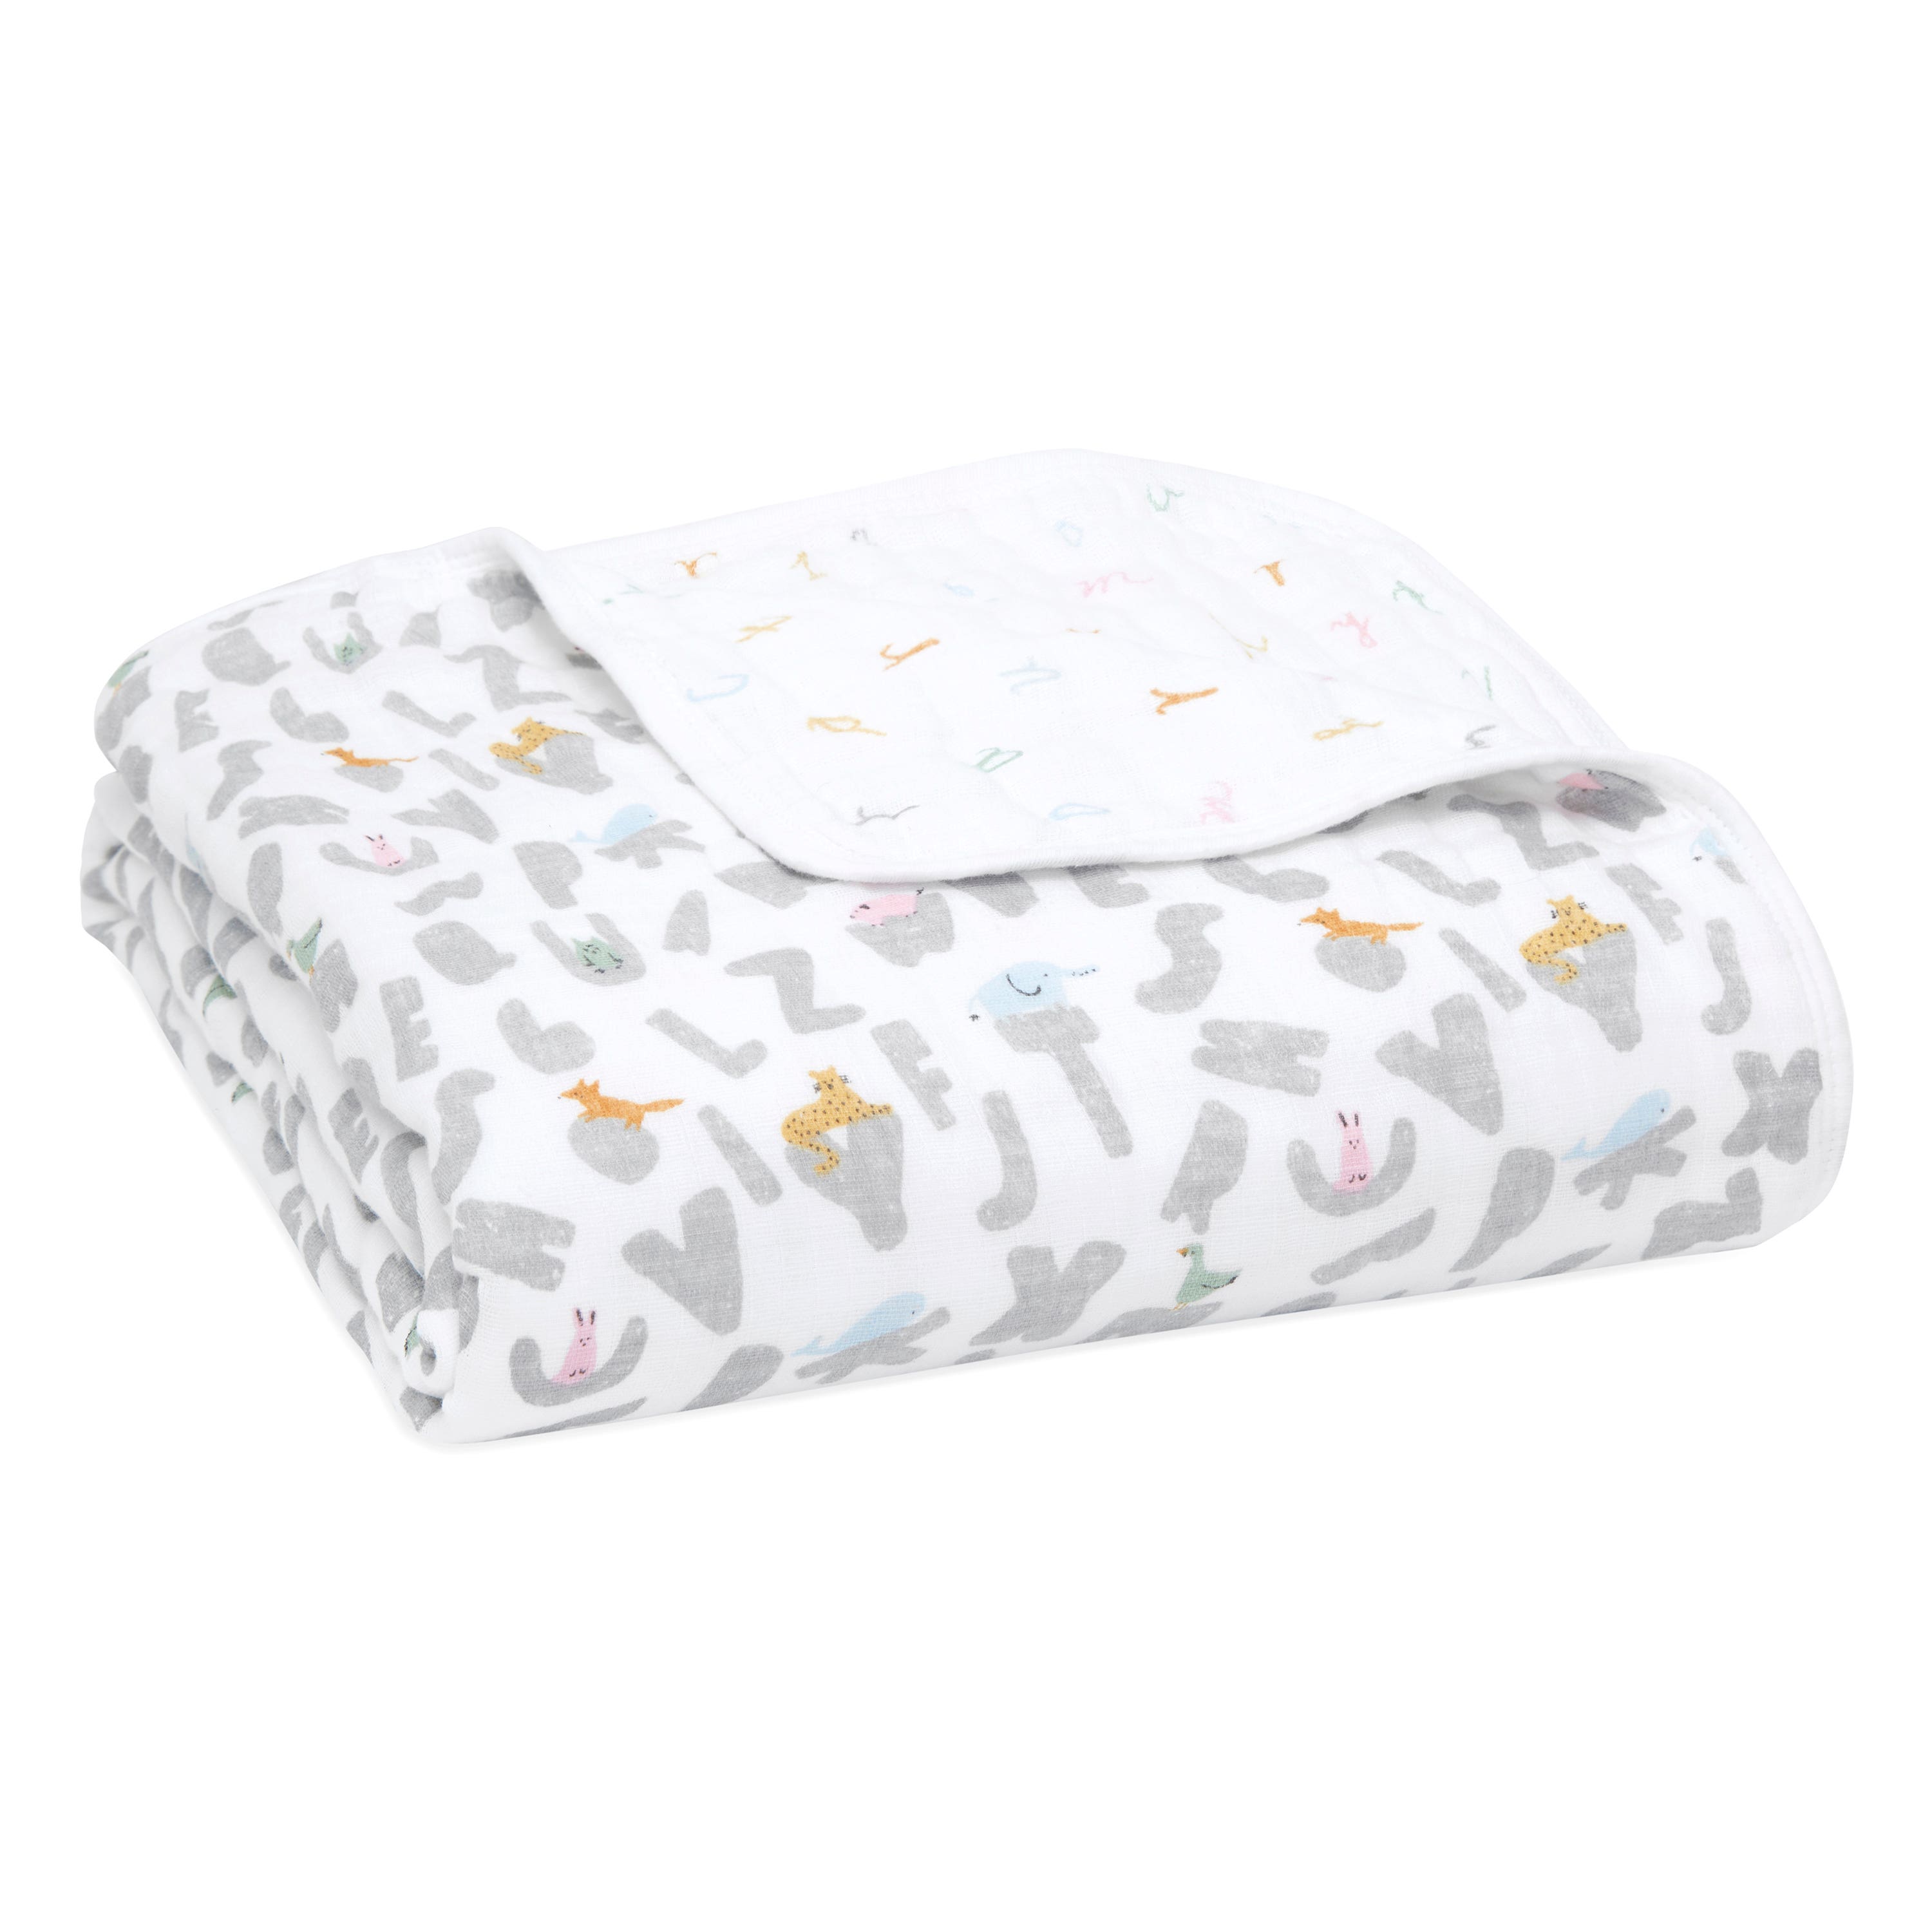 Briar Rose Large 44 X 44 inch 100% Cotton Muslin aden by aden Floral Heart 4 Layer Lightweight and Breathable anais Dream Blanket 